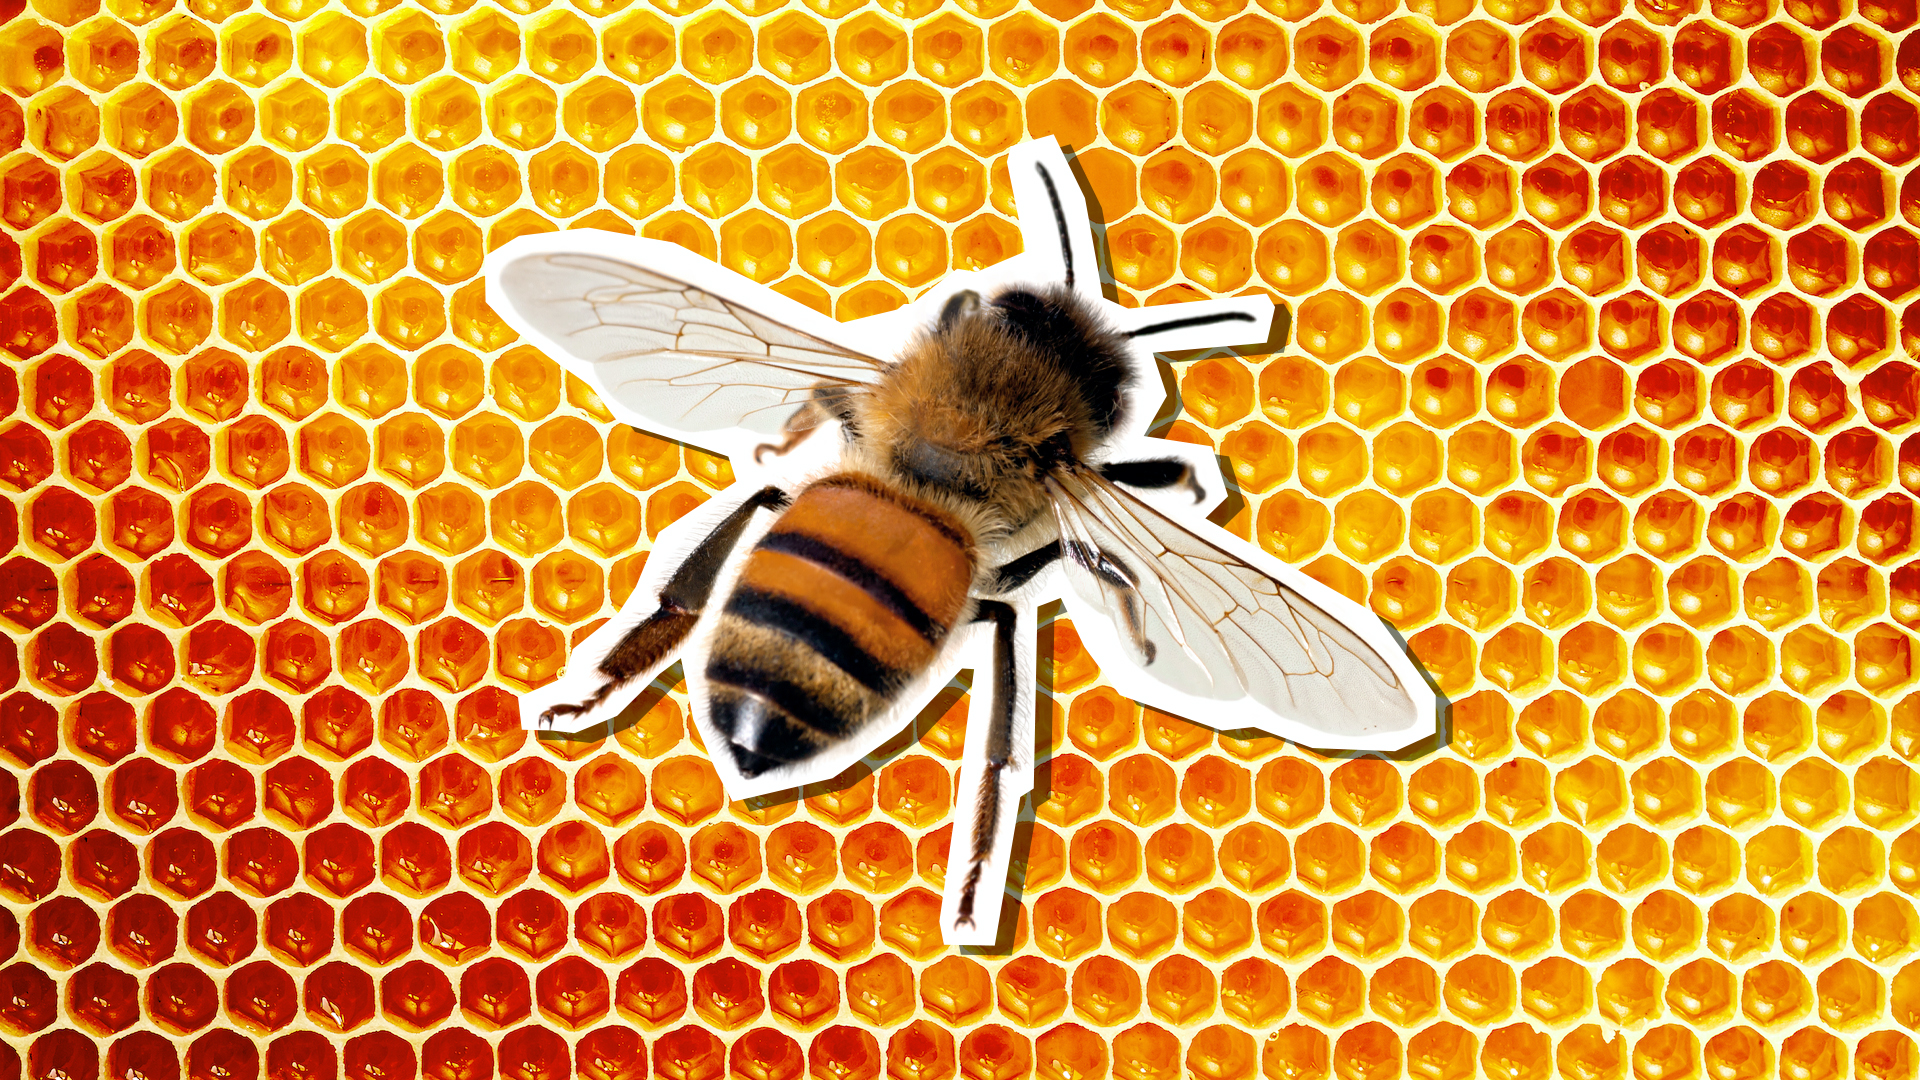 A bee on some honeycomb